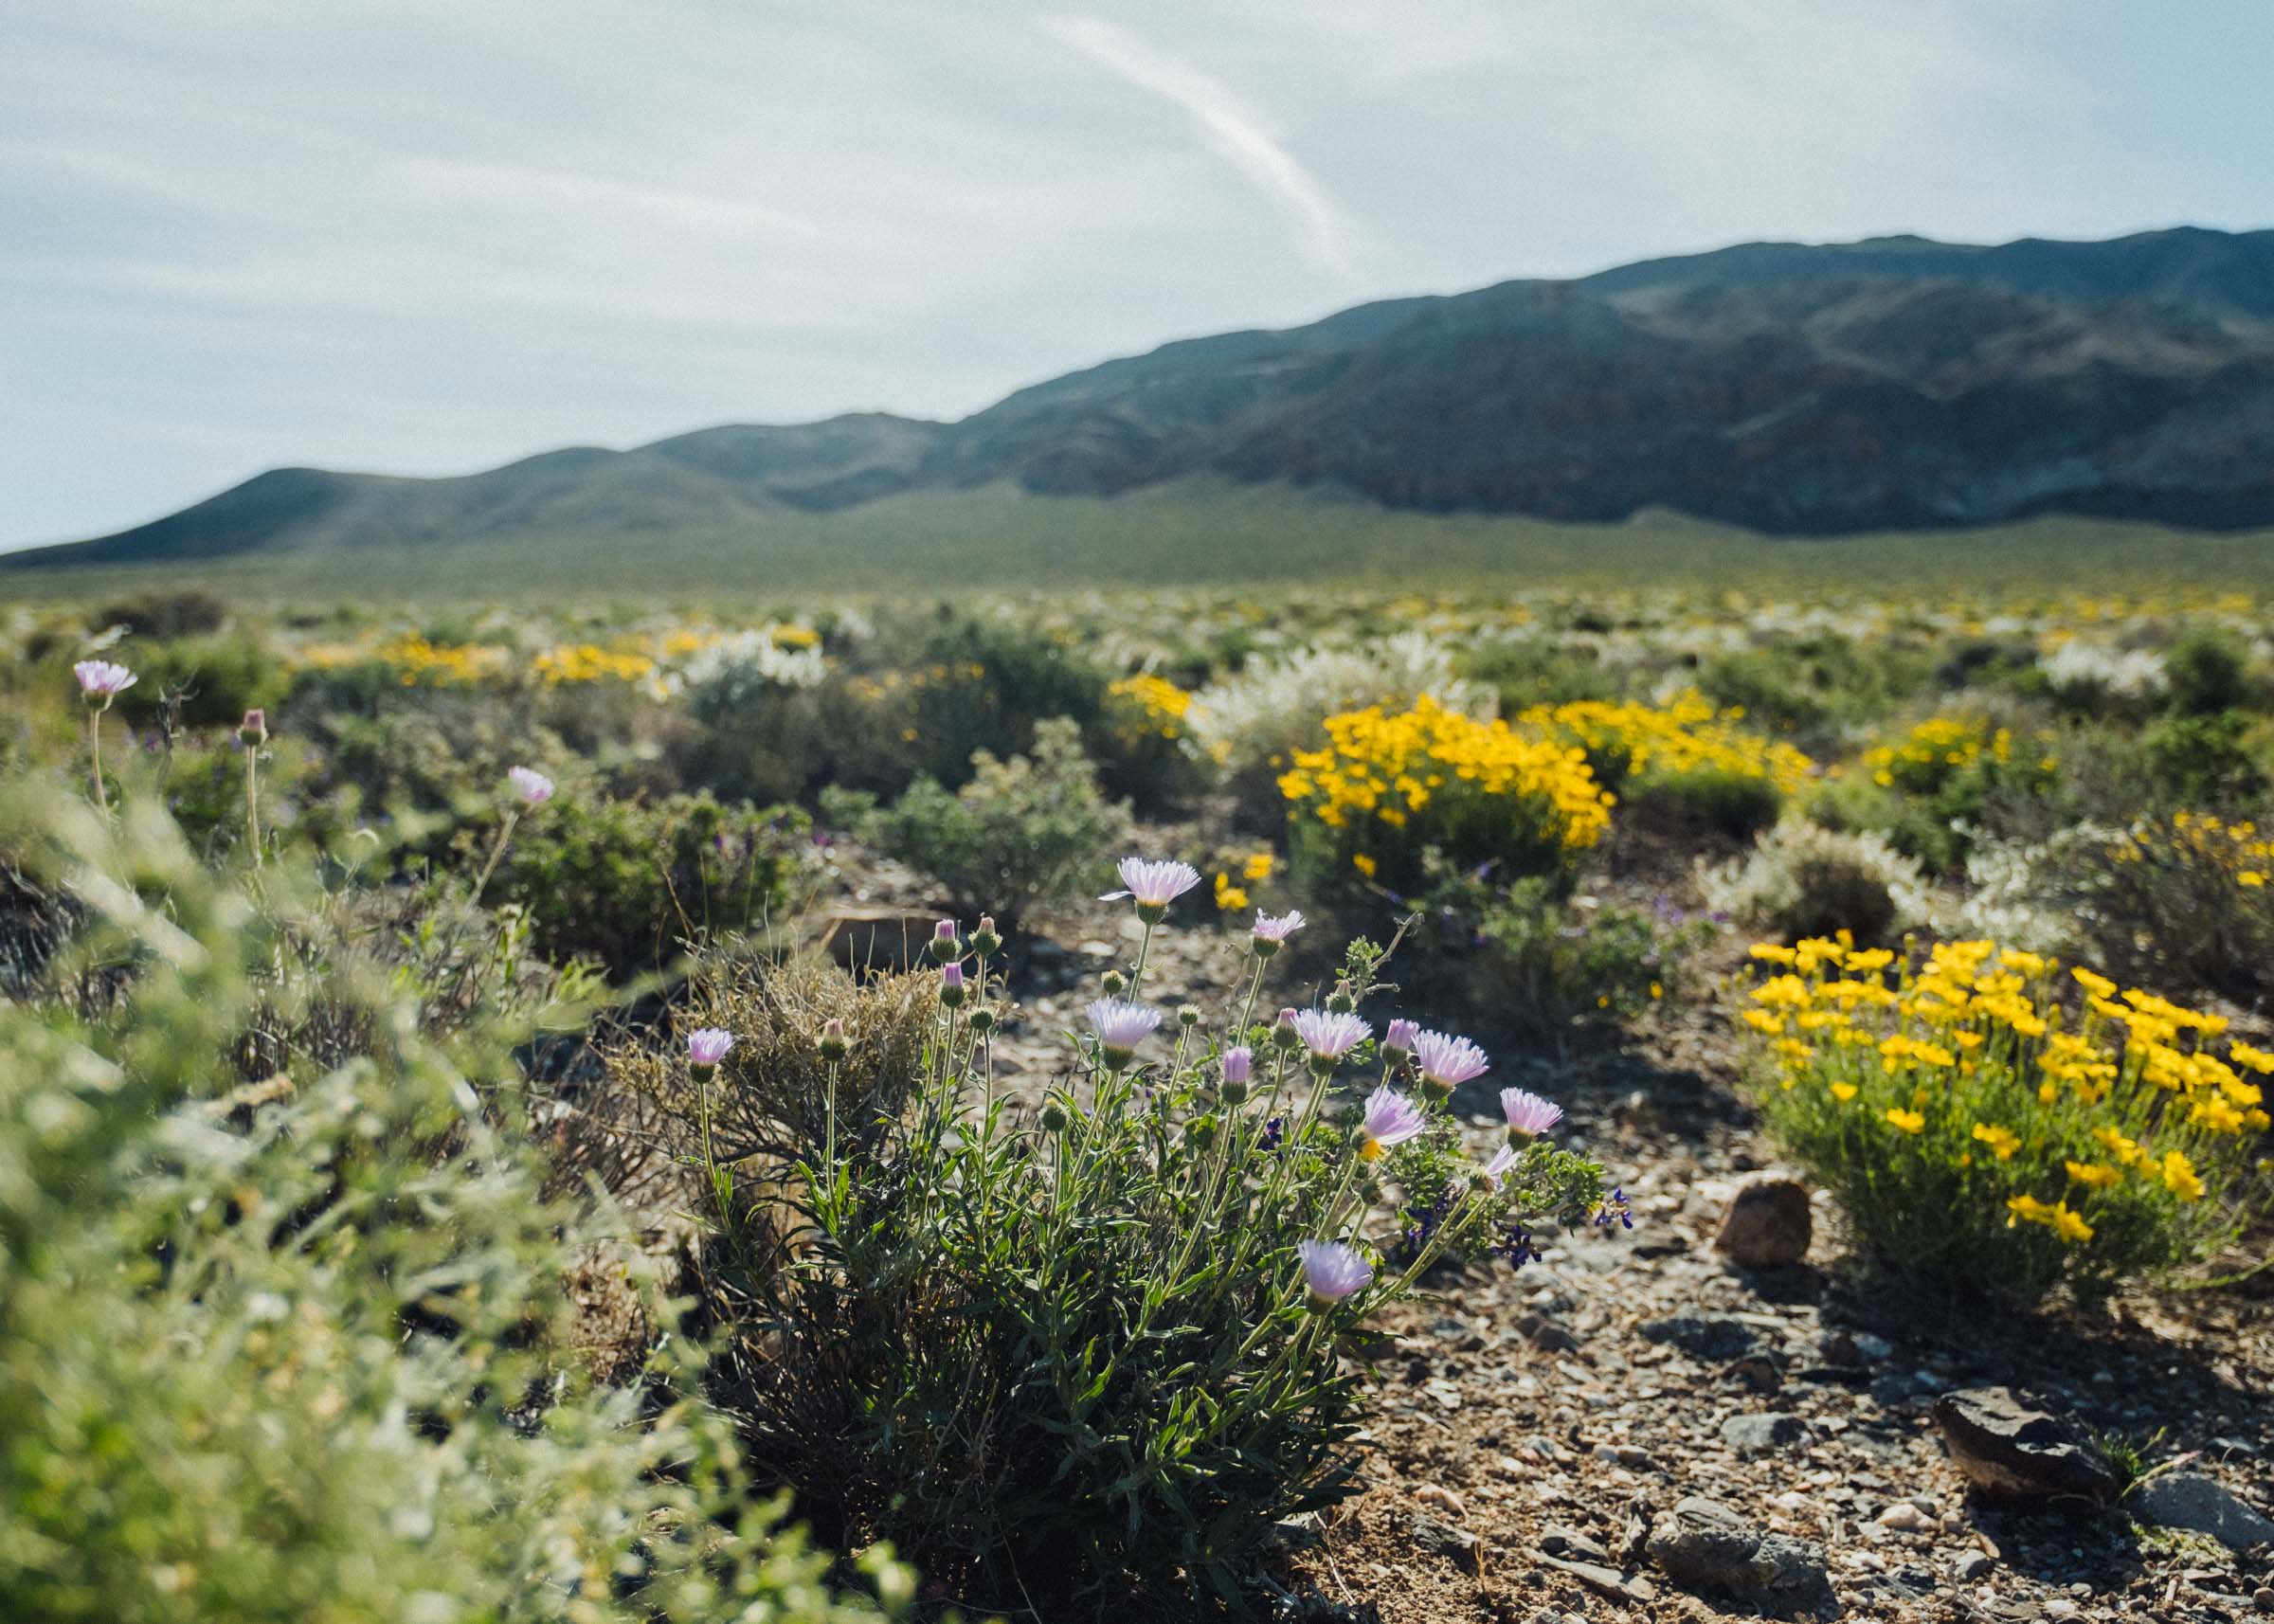 Flowers blooming in the desert of Death Valley